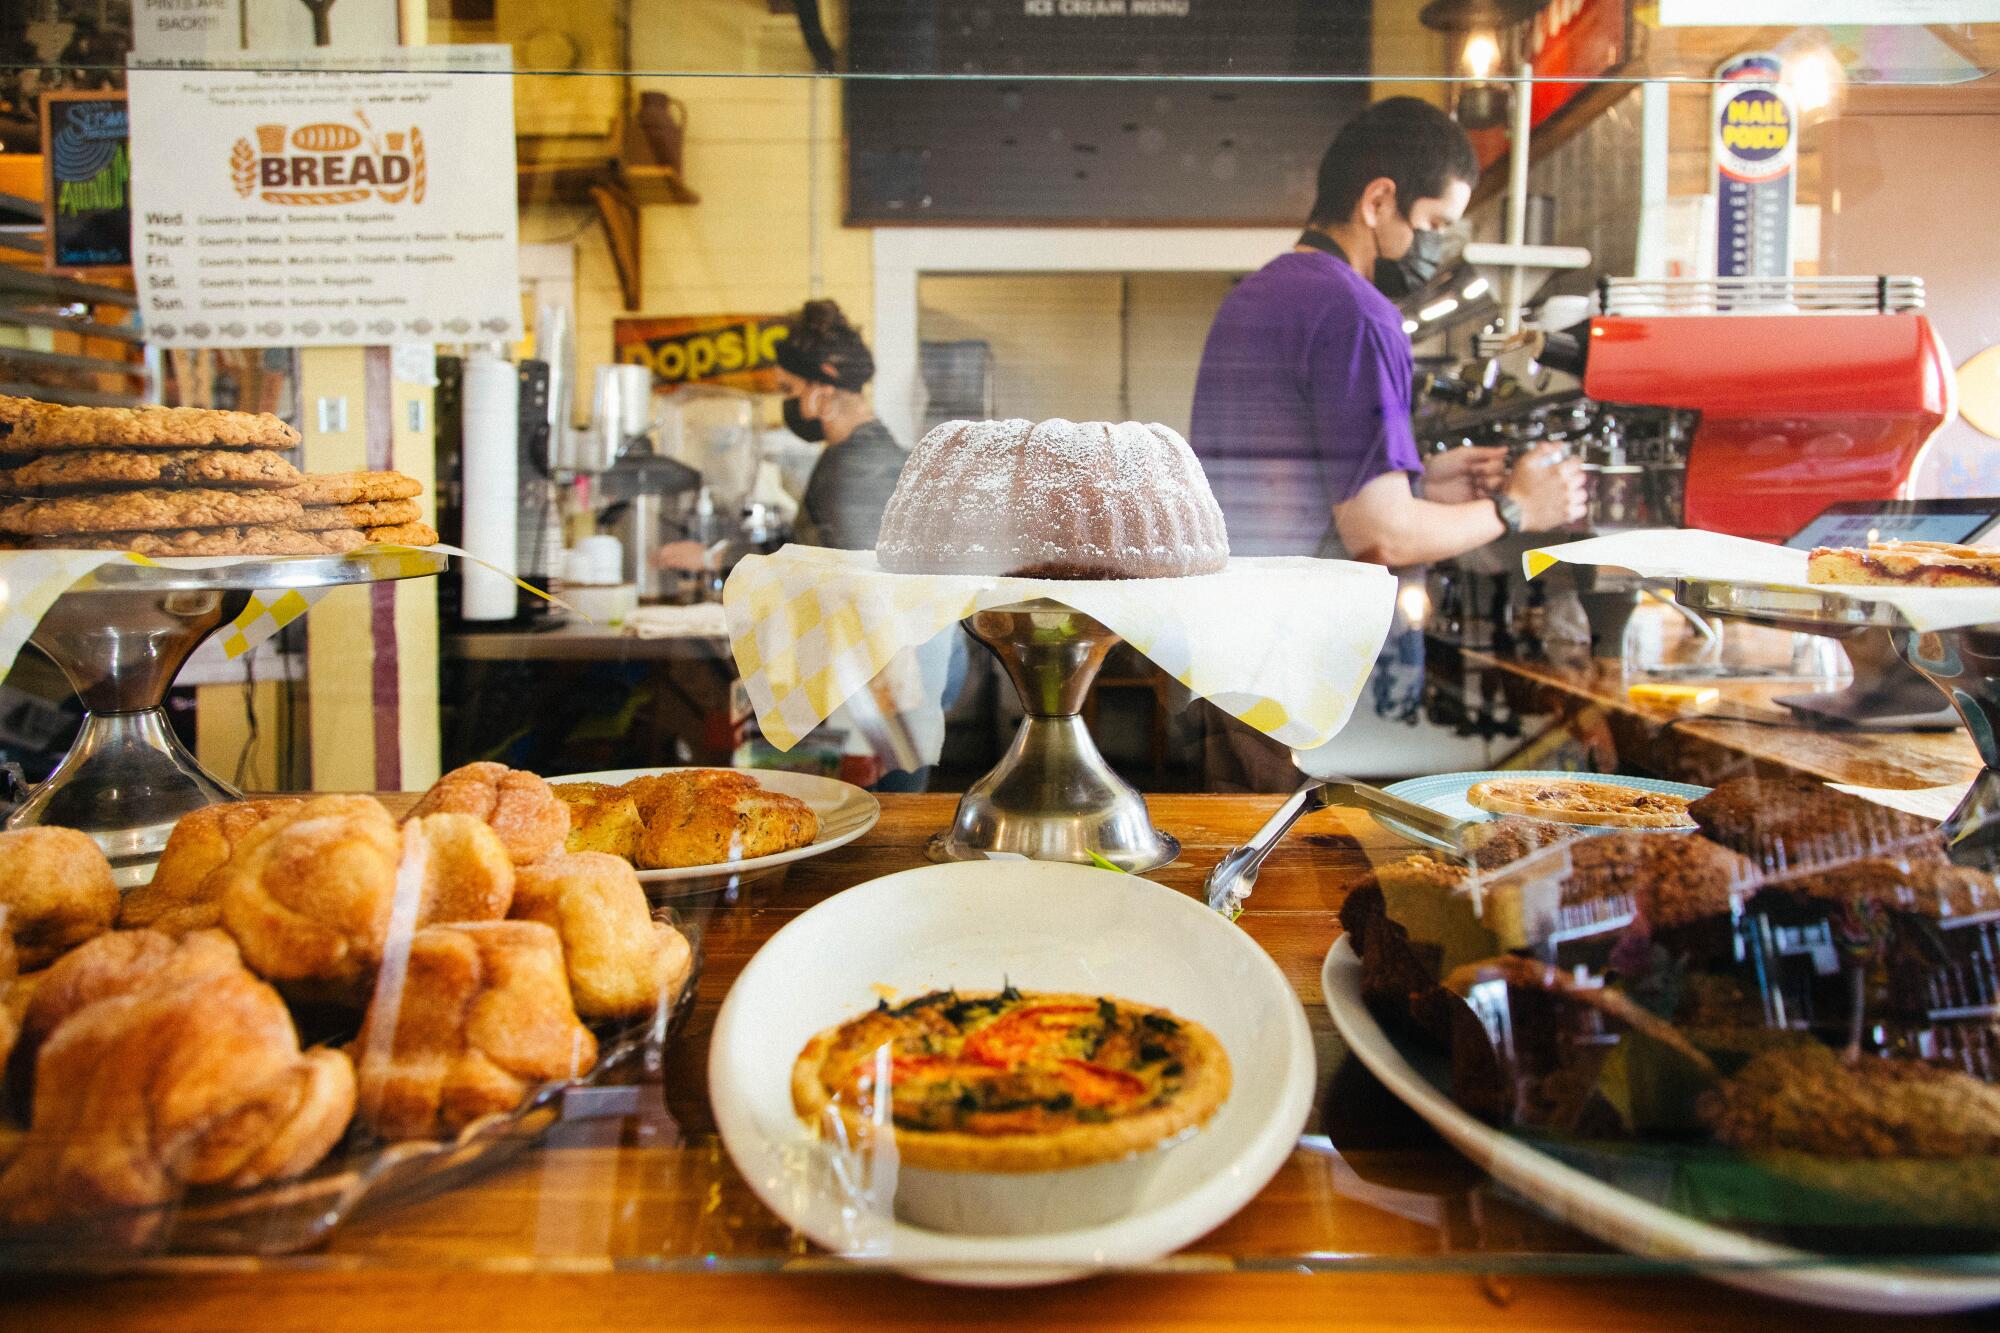 A counter of baked goods behind glass, with a person making coffee  